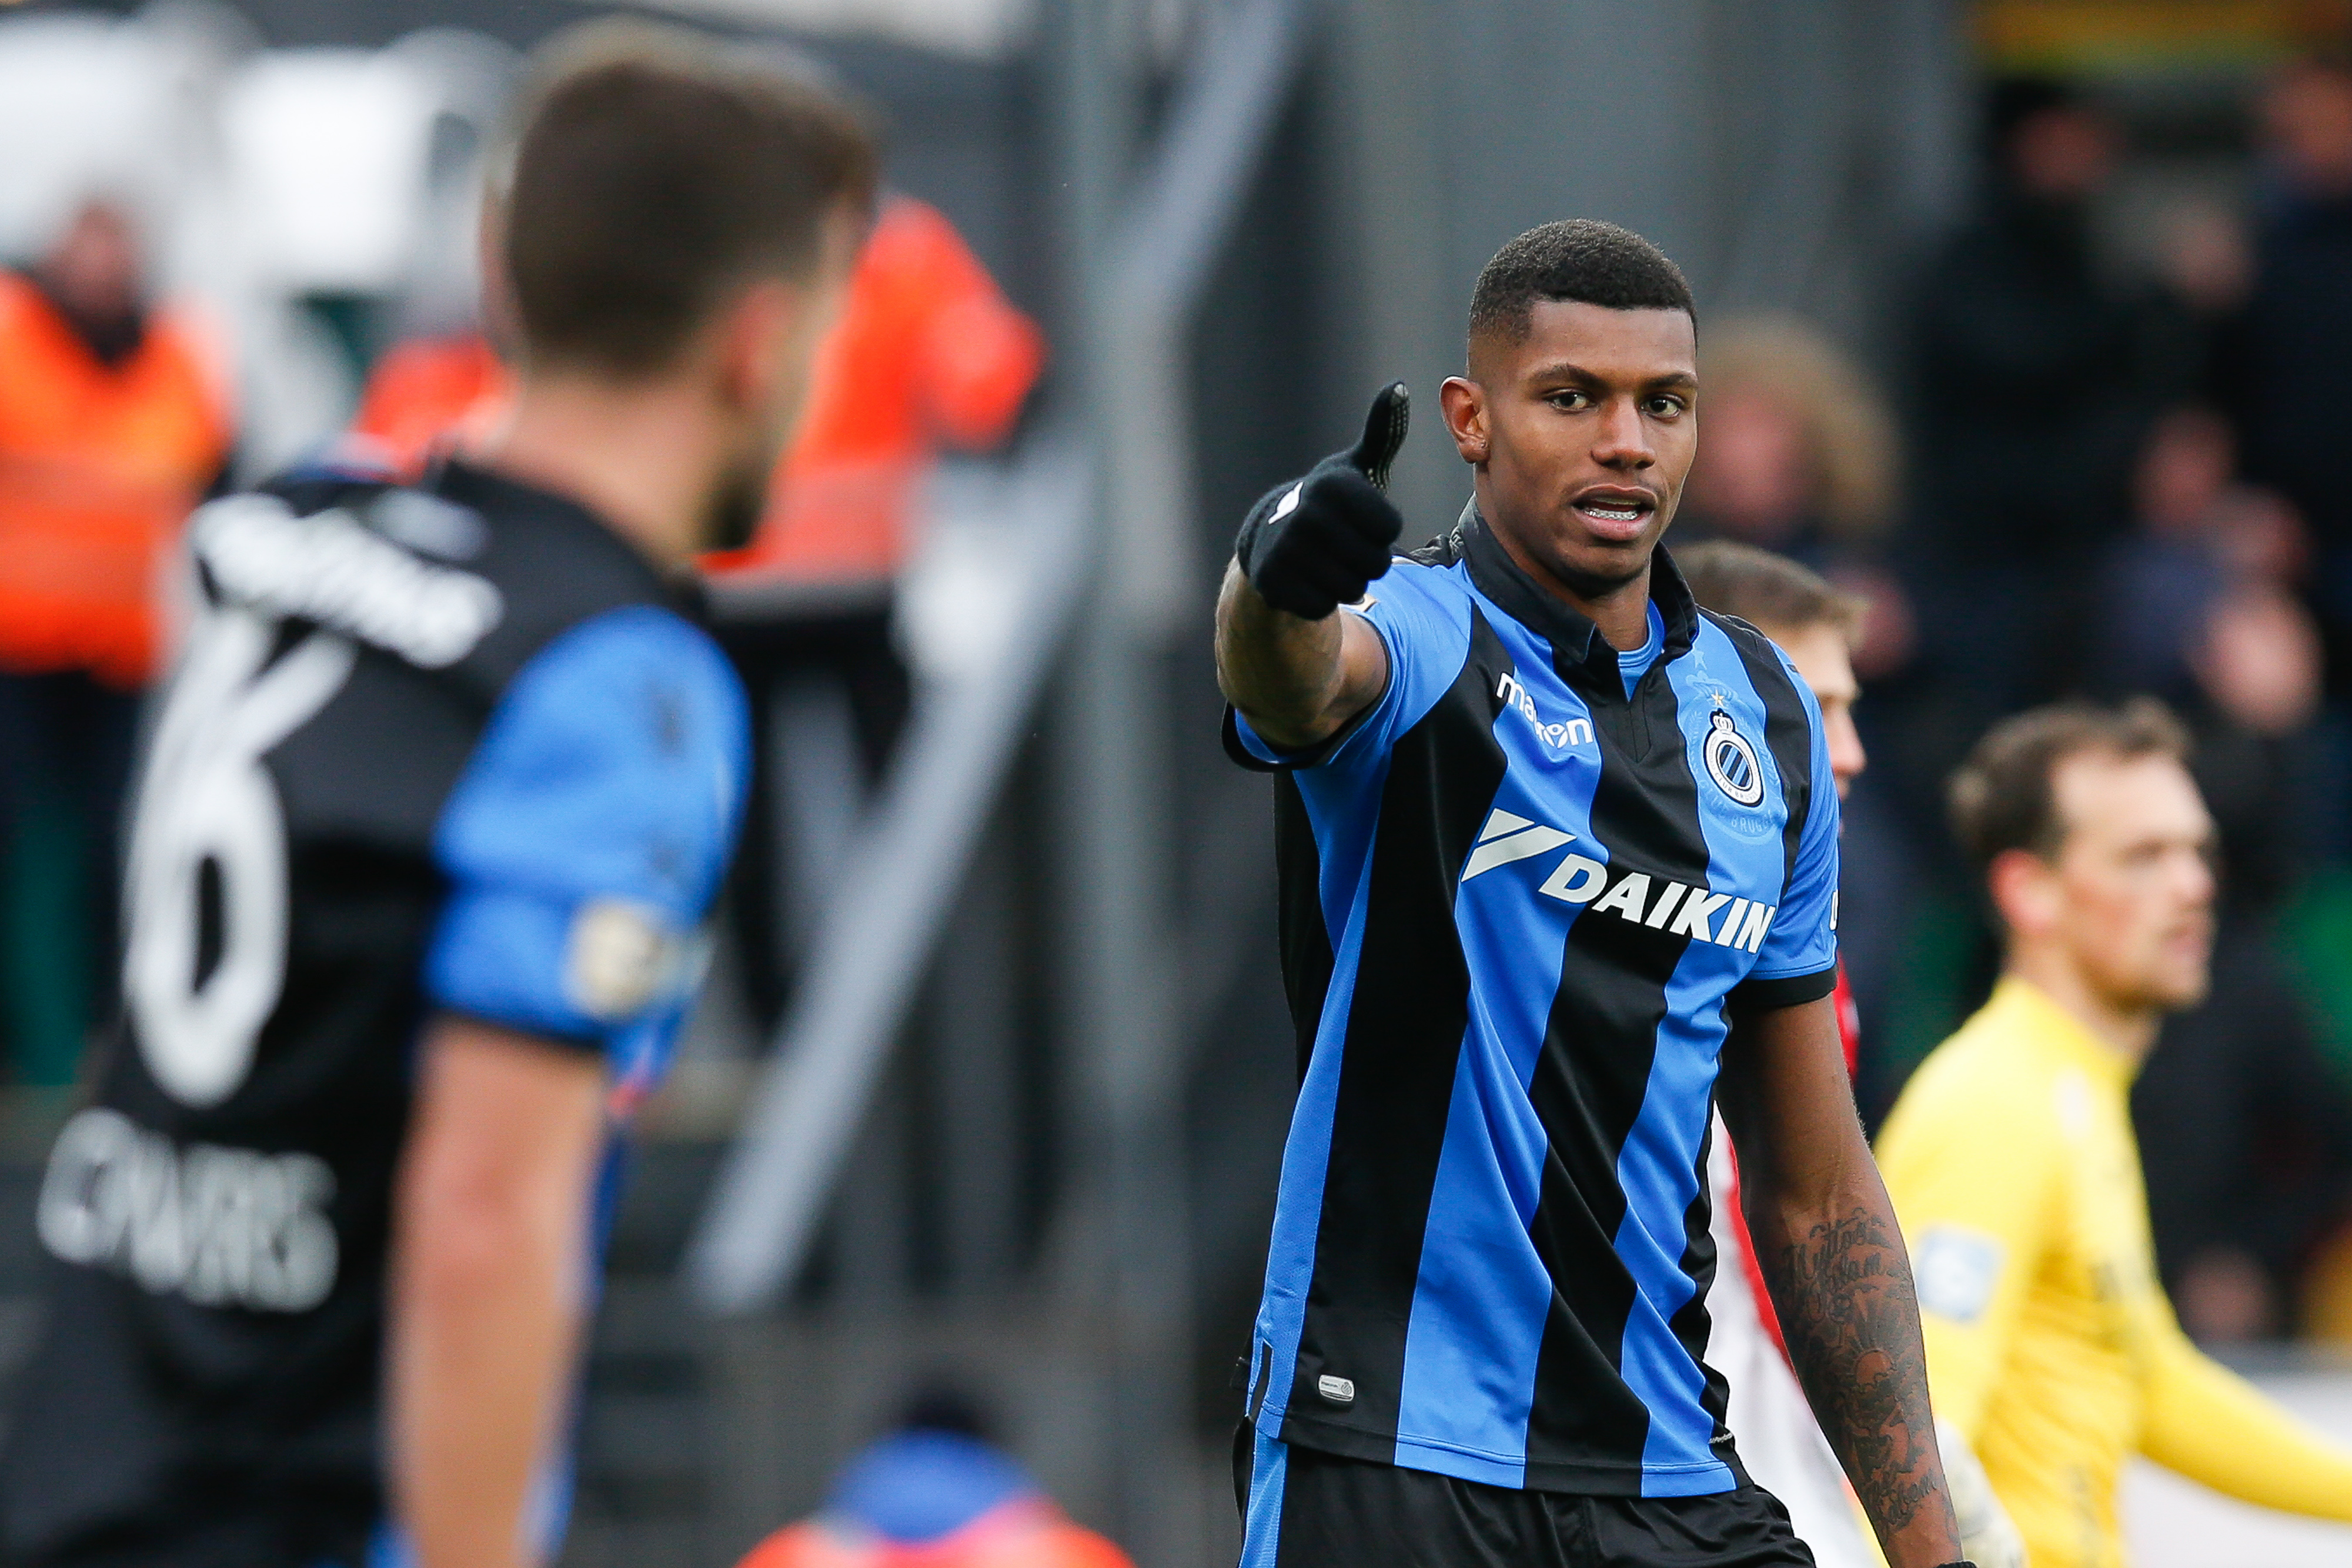 Club's Wesley Moraes celebrates during the soccer match between KV Oostende and Club Brugge, Sunday 27 January 2019 in Oostende, on the 23rd day of the 'Jupiler Pro League' Belgian soccer championship season 2018-2019. BELGA PHOTO BRUNO FAHY        (Photo credit should read BRUNO FAHY/AFP/Getty Images)